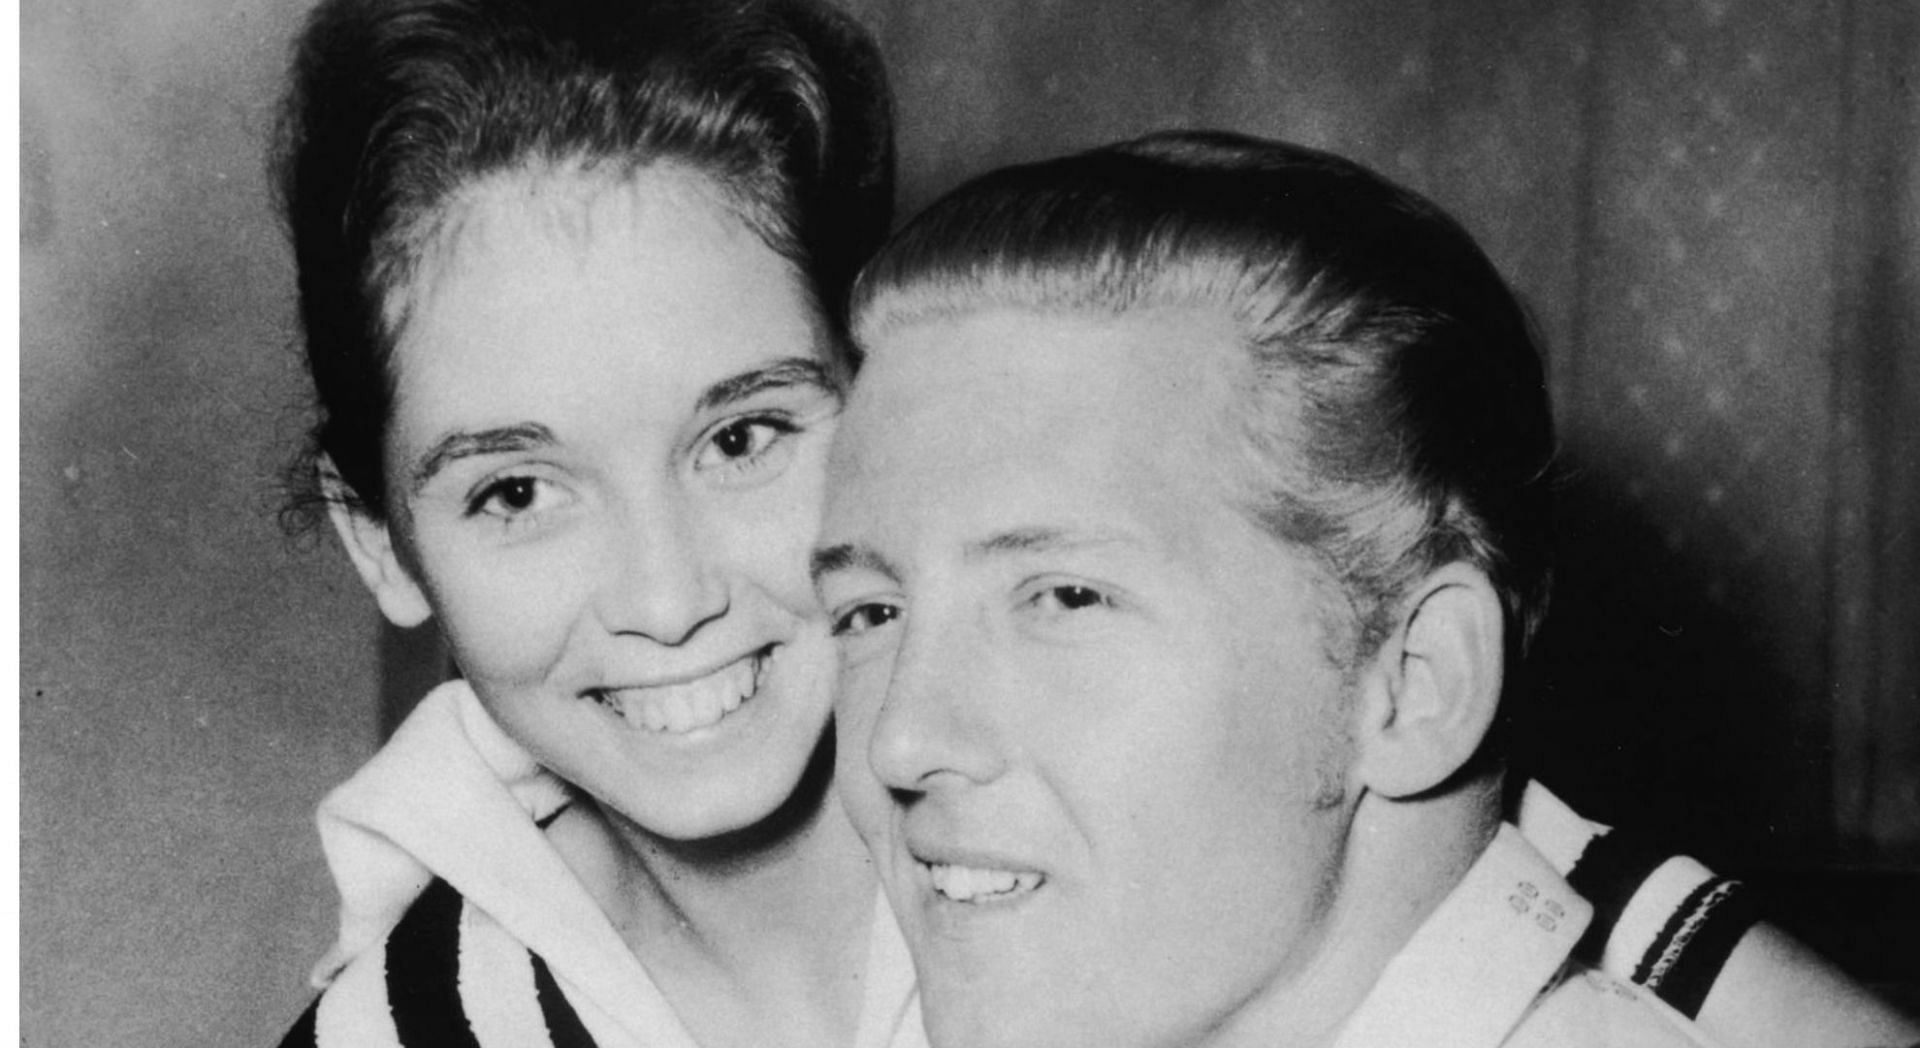 Did Jerry Lee Lewis marry his 13-year old cousin? Child bride claim  explored as Rock & Roll legend dies aged 87